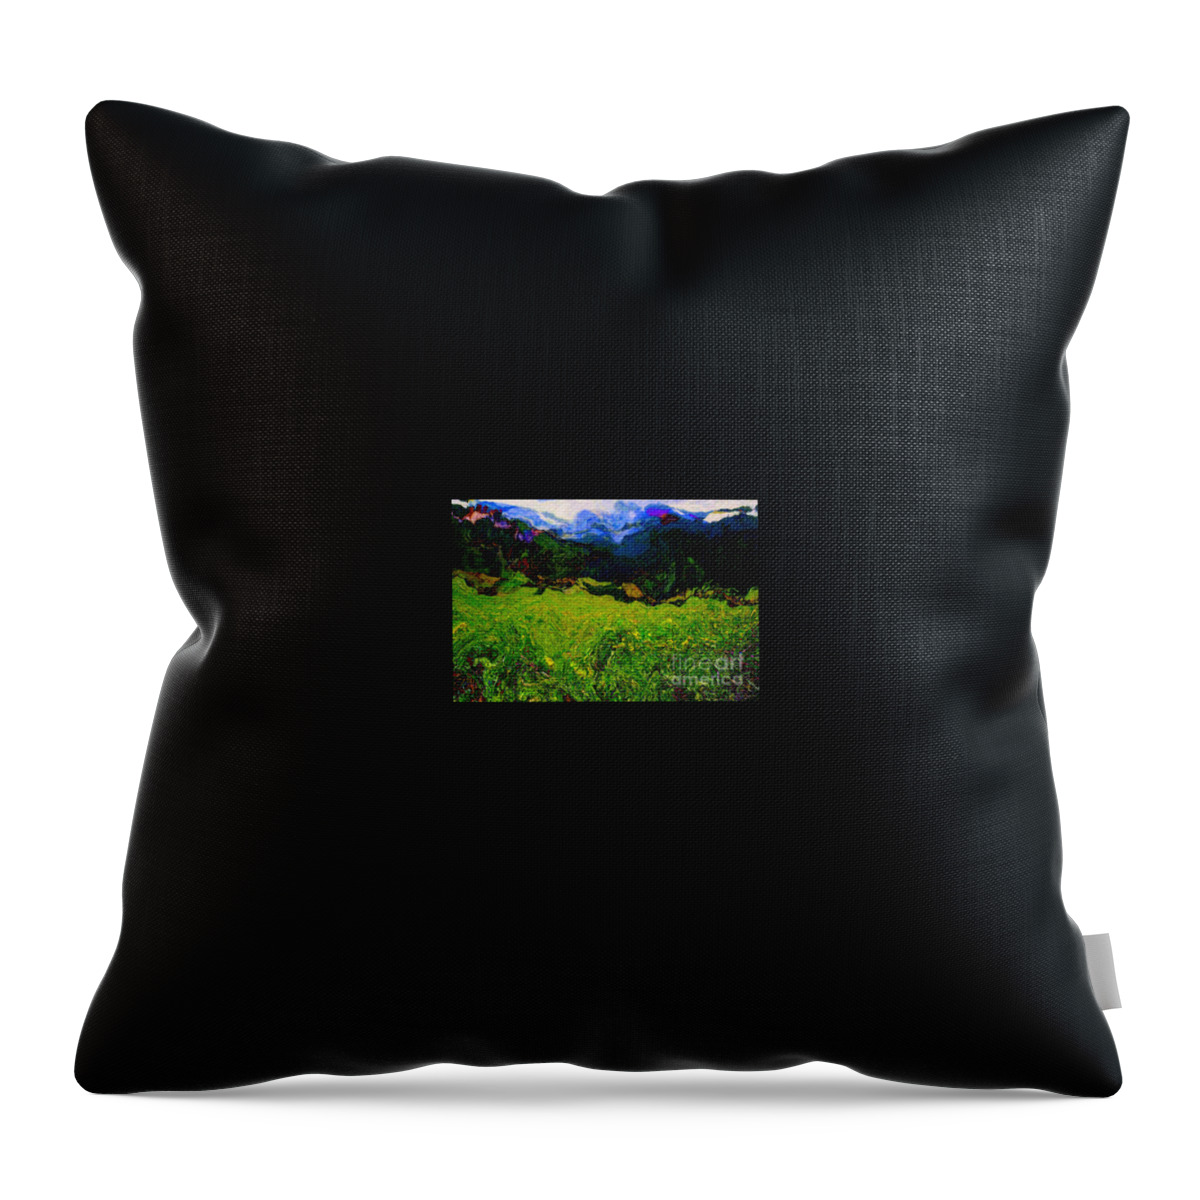 Yellowstone National Park Throw Pillow featuring the photograph High Country Yellowstone by Julie Lueders 